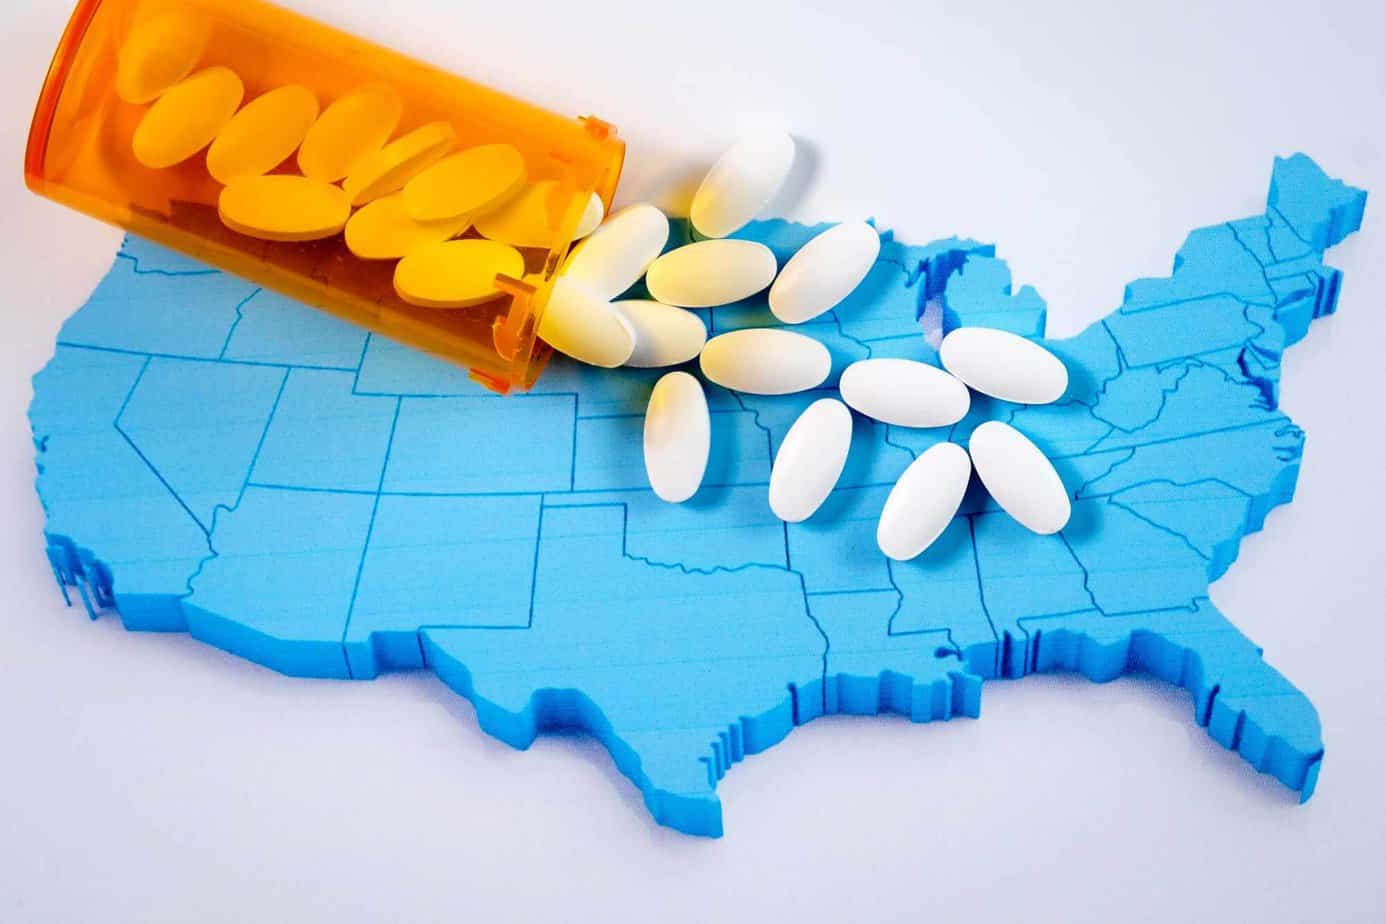 narcotics opioids spilled onto blue map of the United States